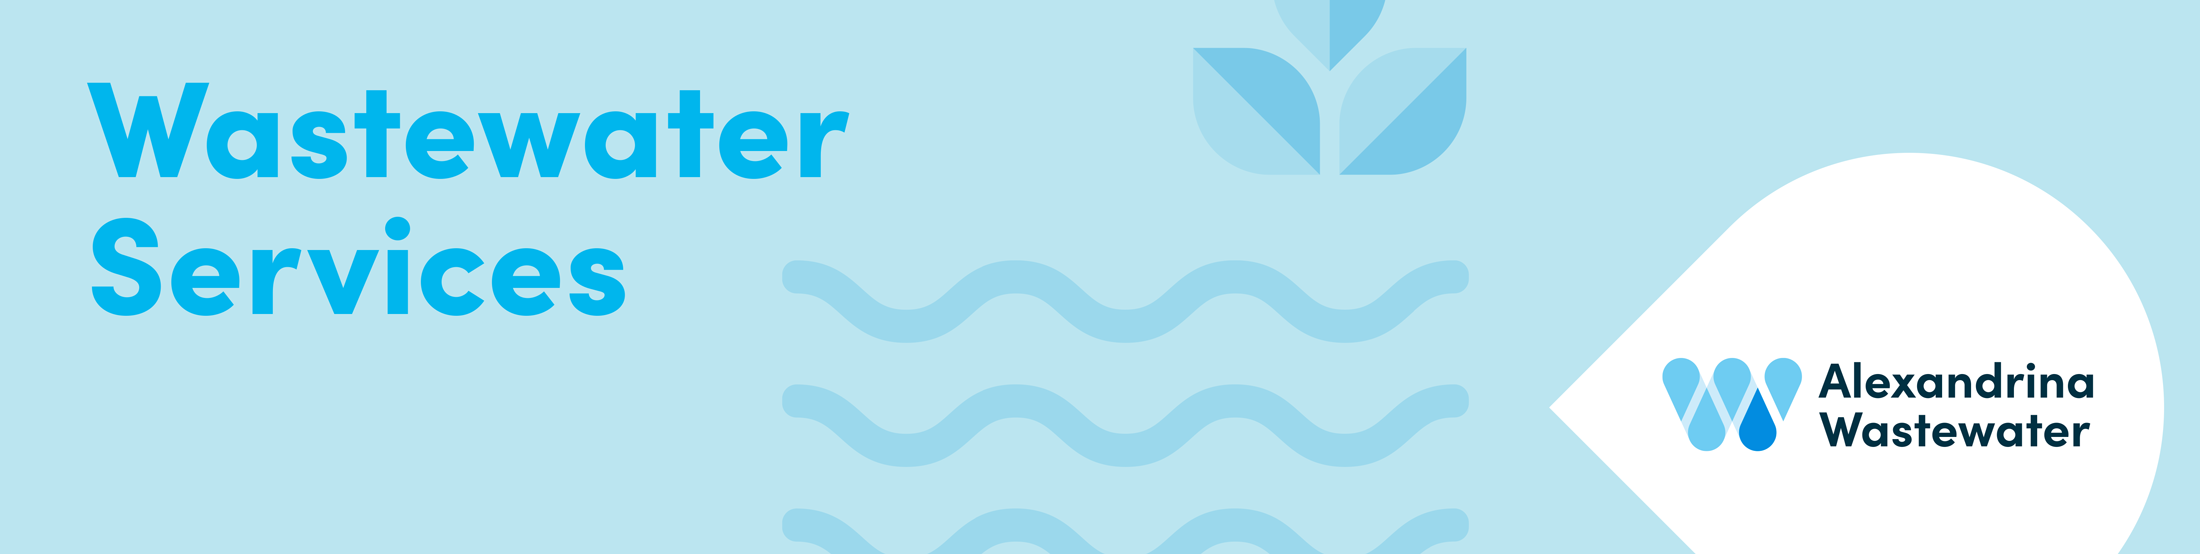 wastewater banner image